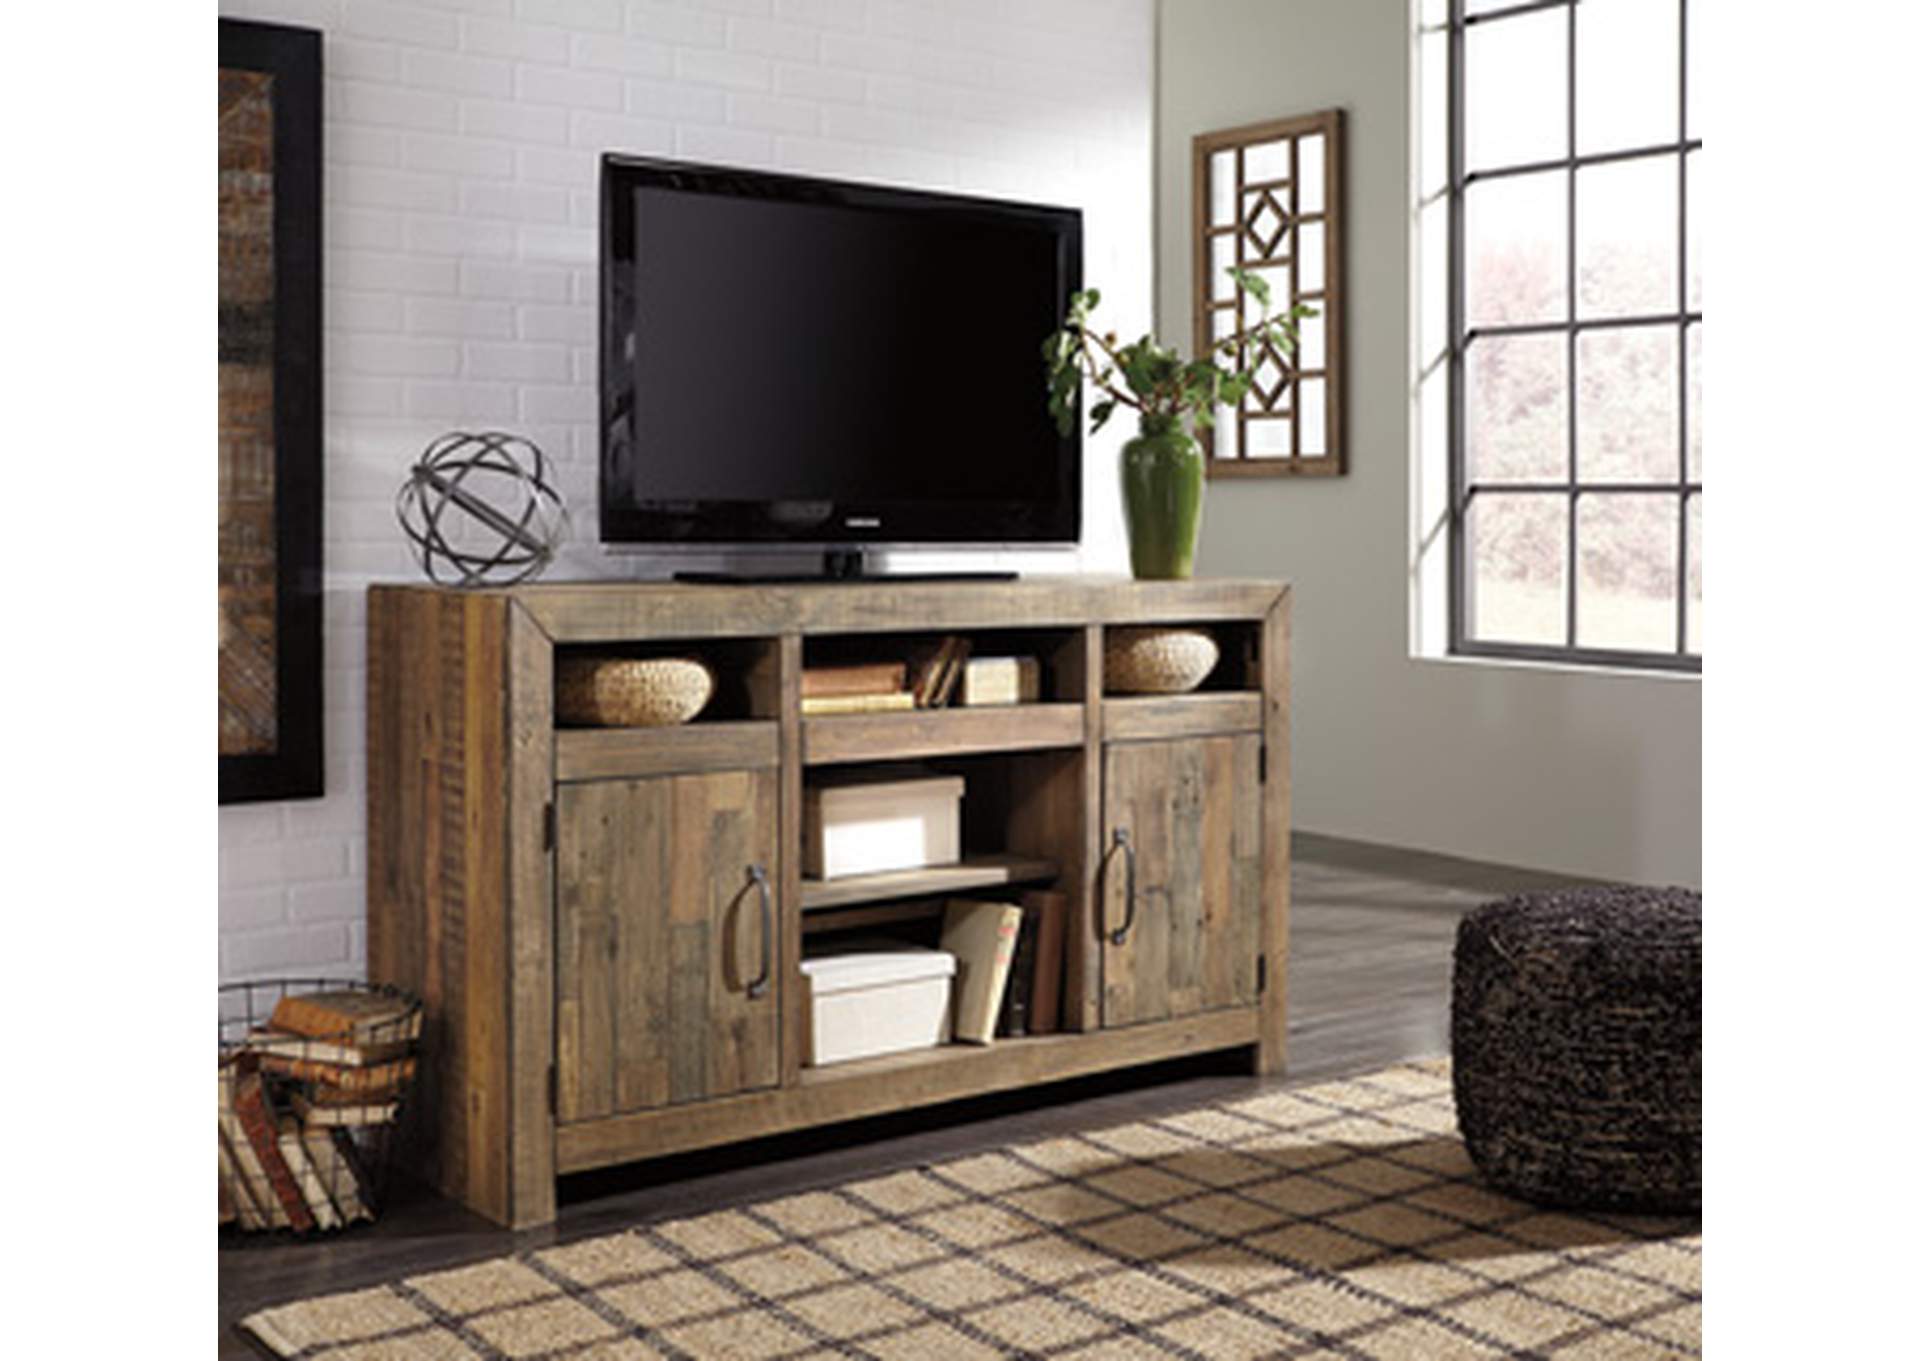 Sommerford 62" TV Stand,Signature Design By Ashley